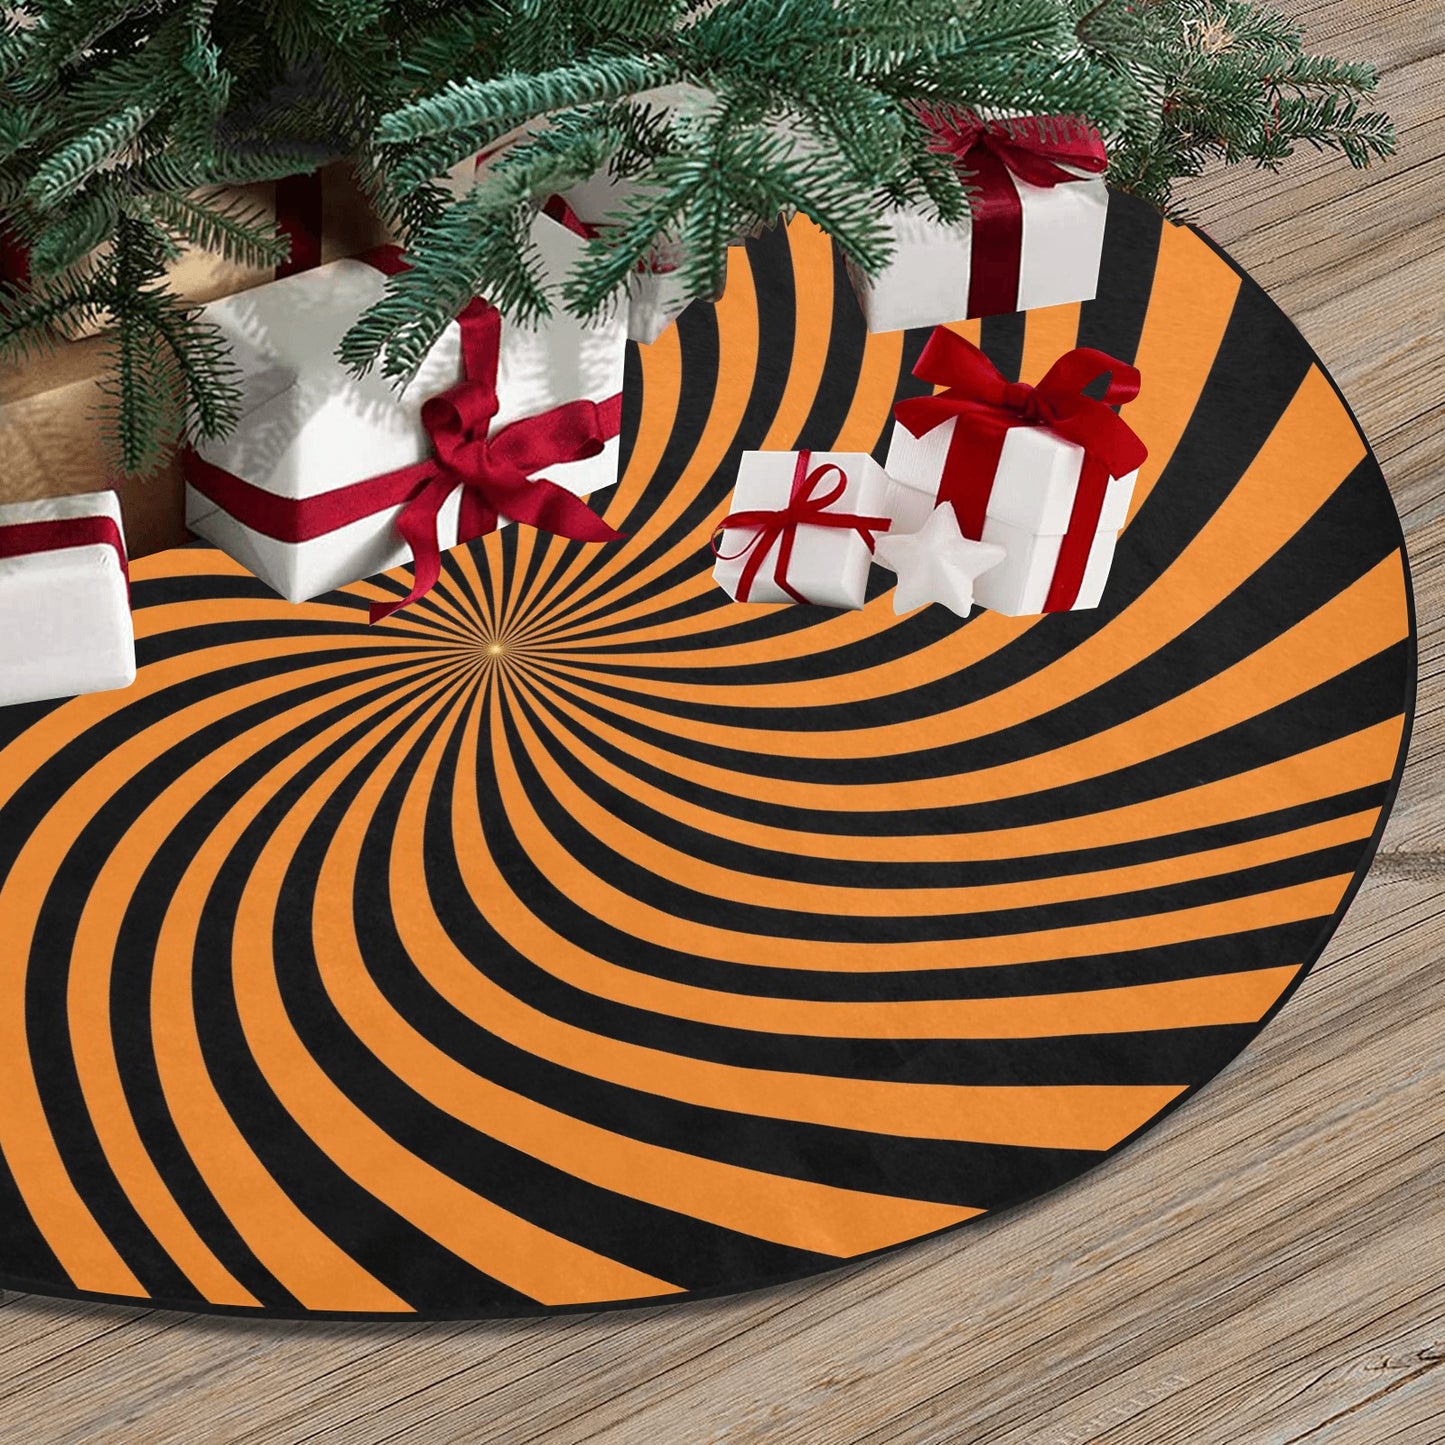 Halloween Tree Skirt, Orange Black Spiral Christmas Stand Base Cover Home Decor Decoration All Hallows Eve Creepy Spooky Party Starcove Fashion